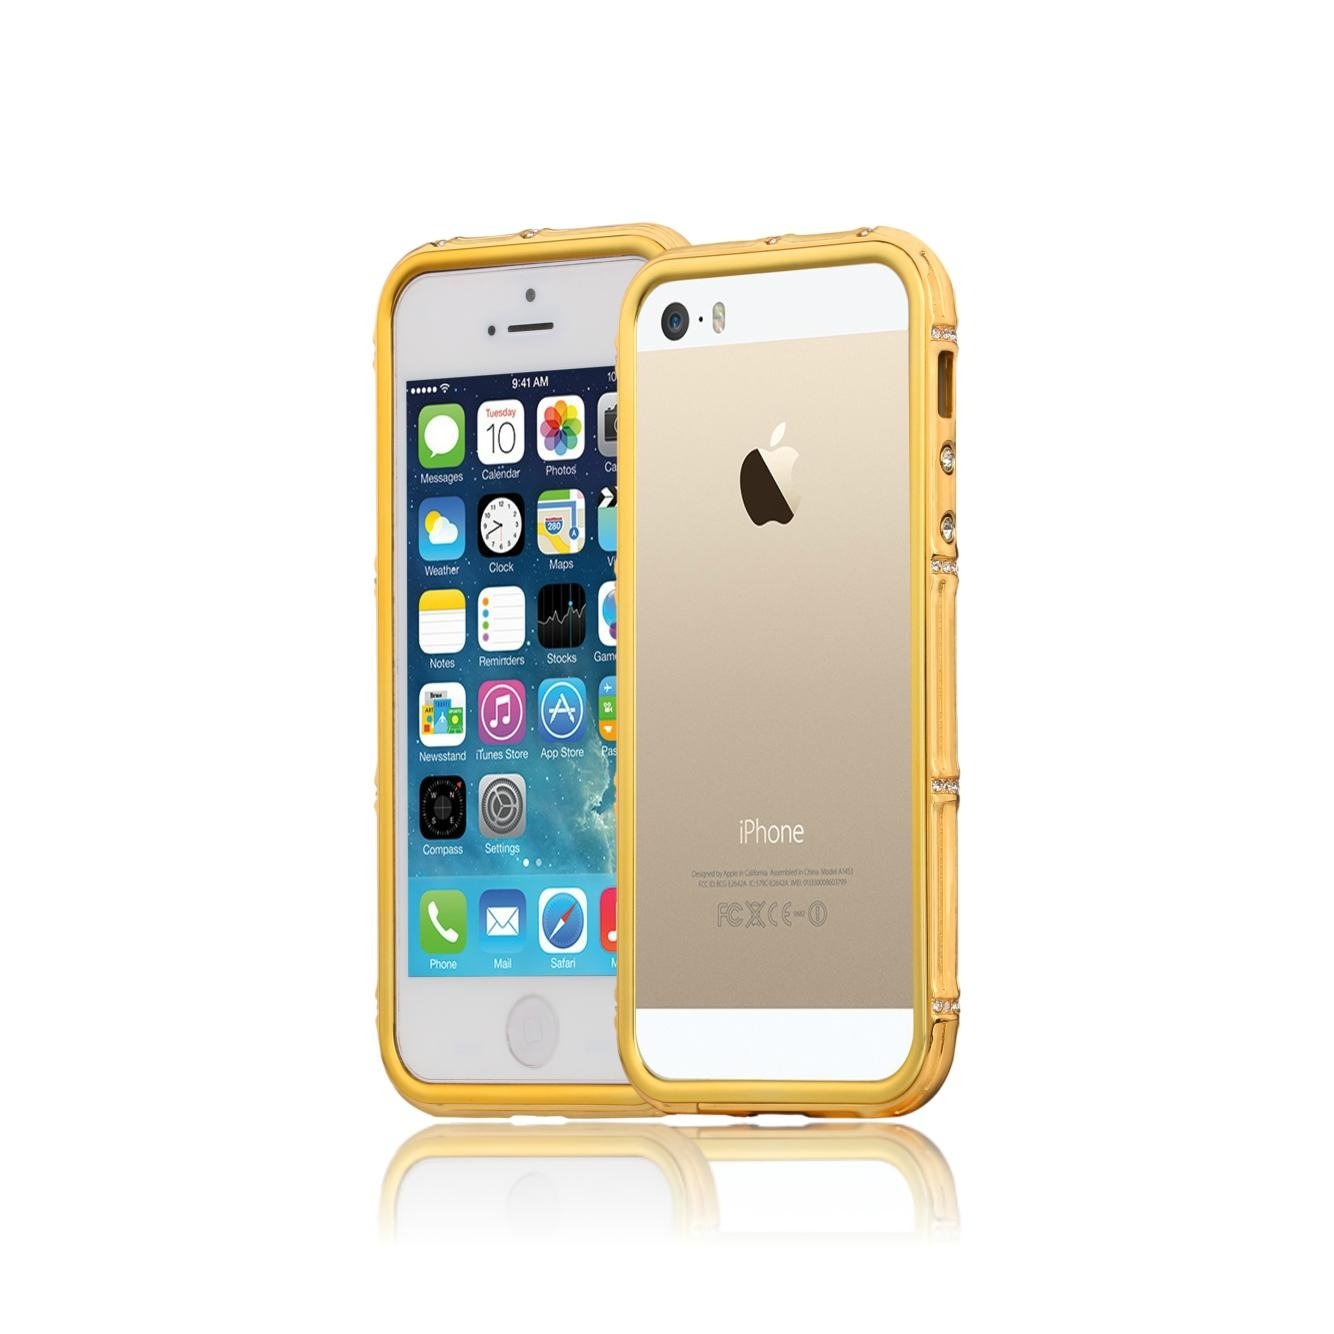 Luxury Jewelry Style with Crystal Inlaid Metal Bumpers for iPhone 5/5S 2